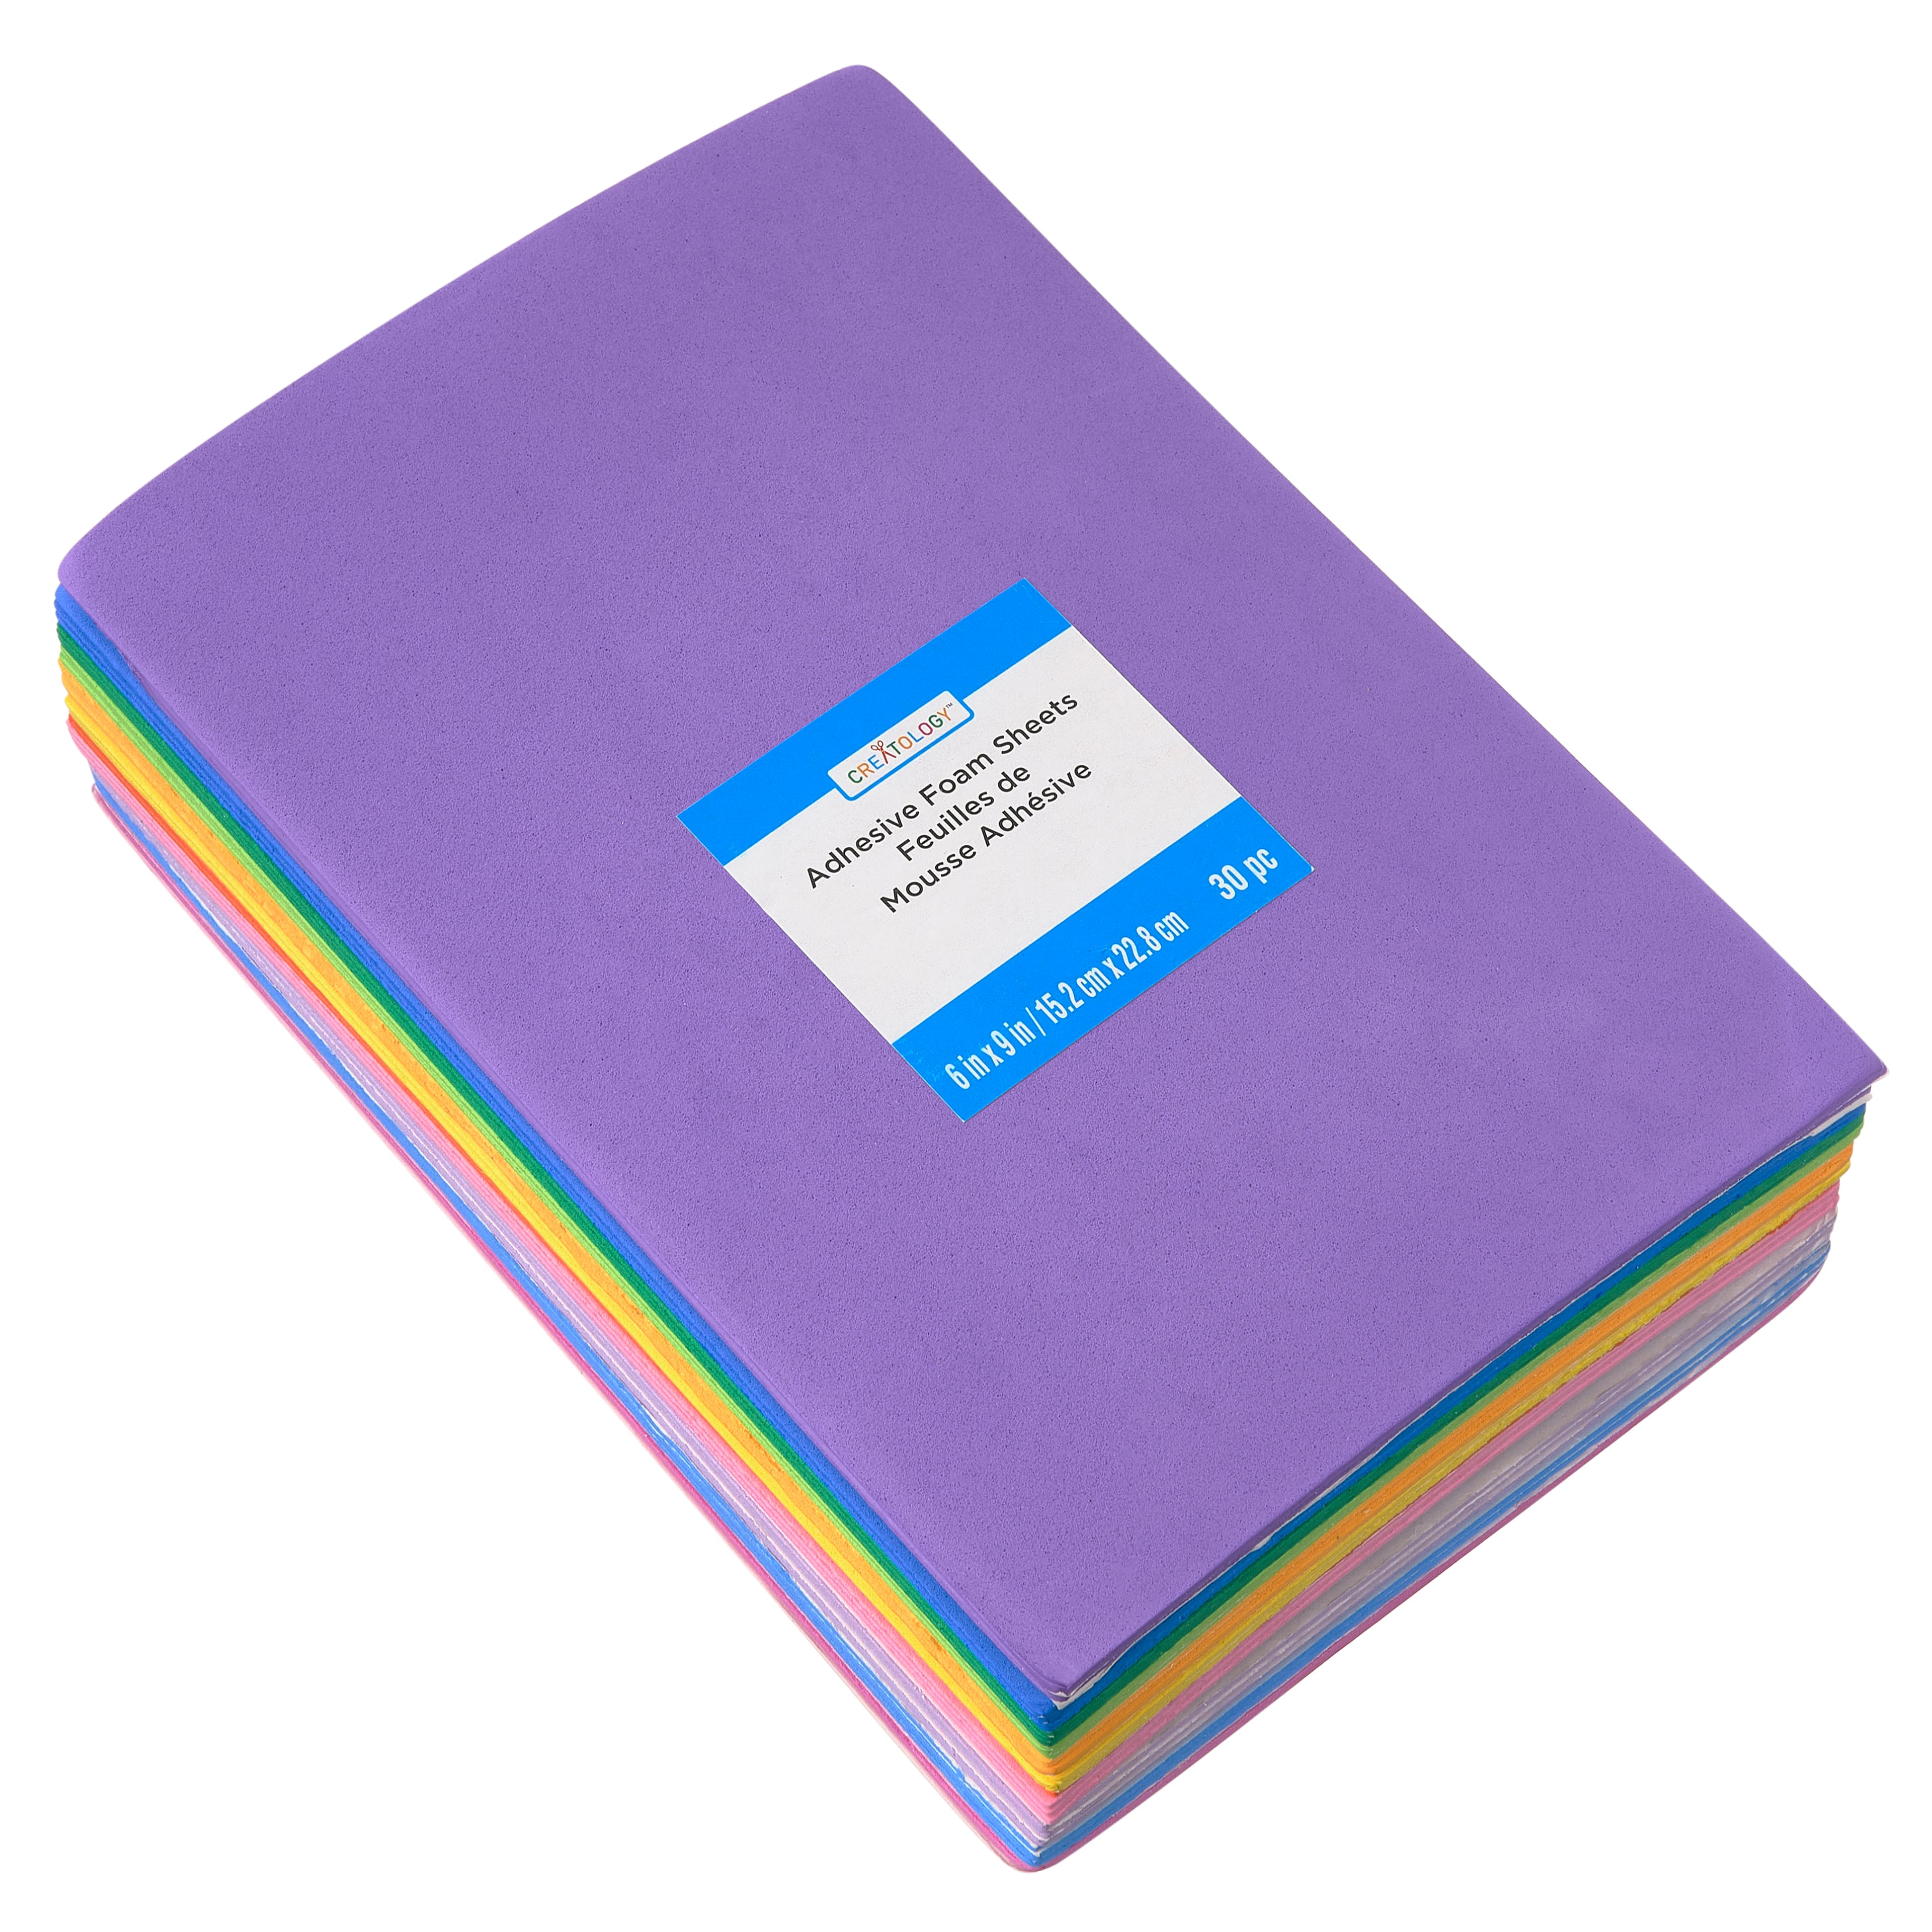 12 Packs: 30 ct. (360 total) Adhesive Foam Sheets by Creatology™